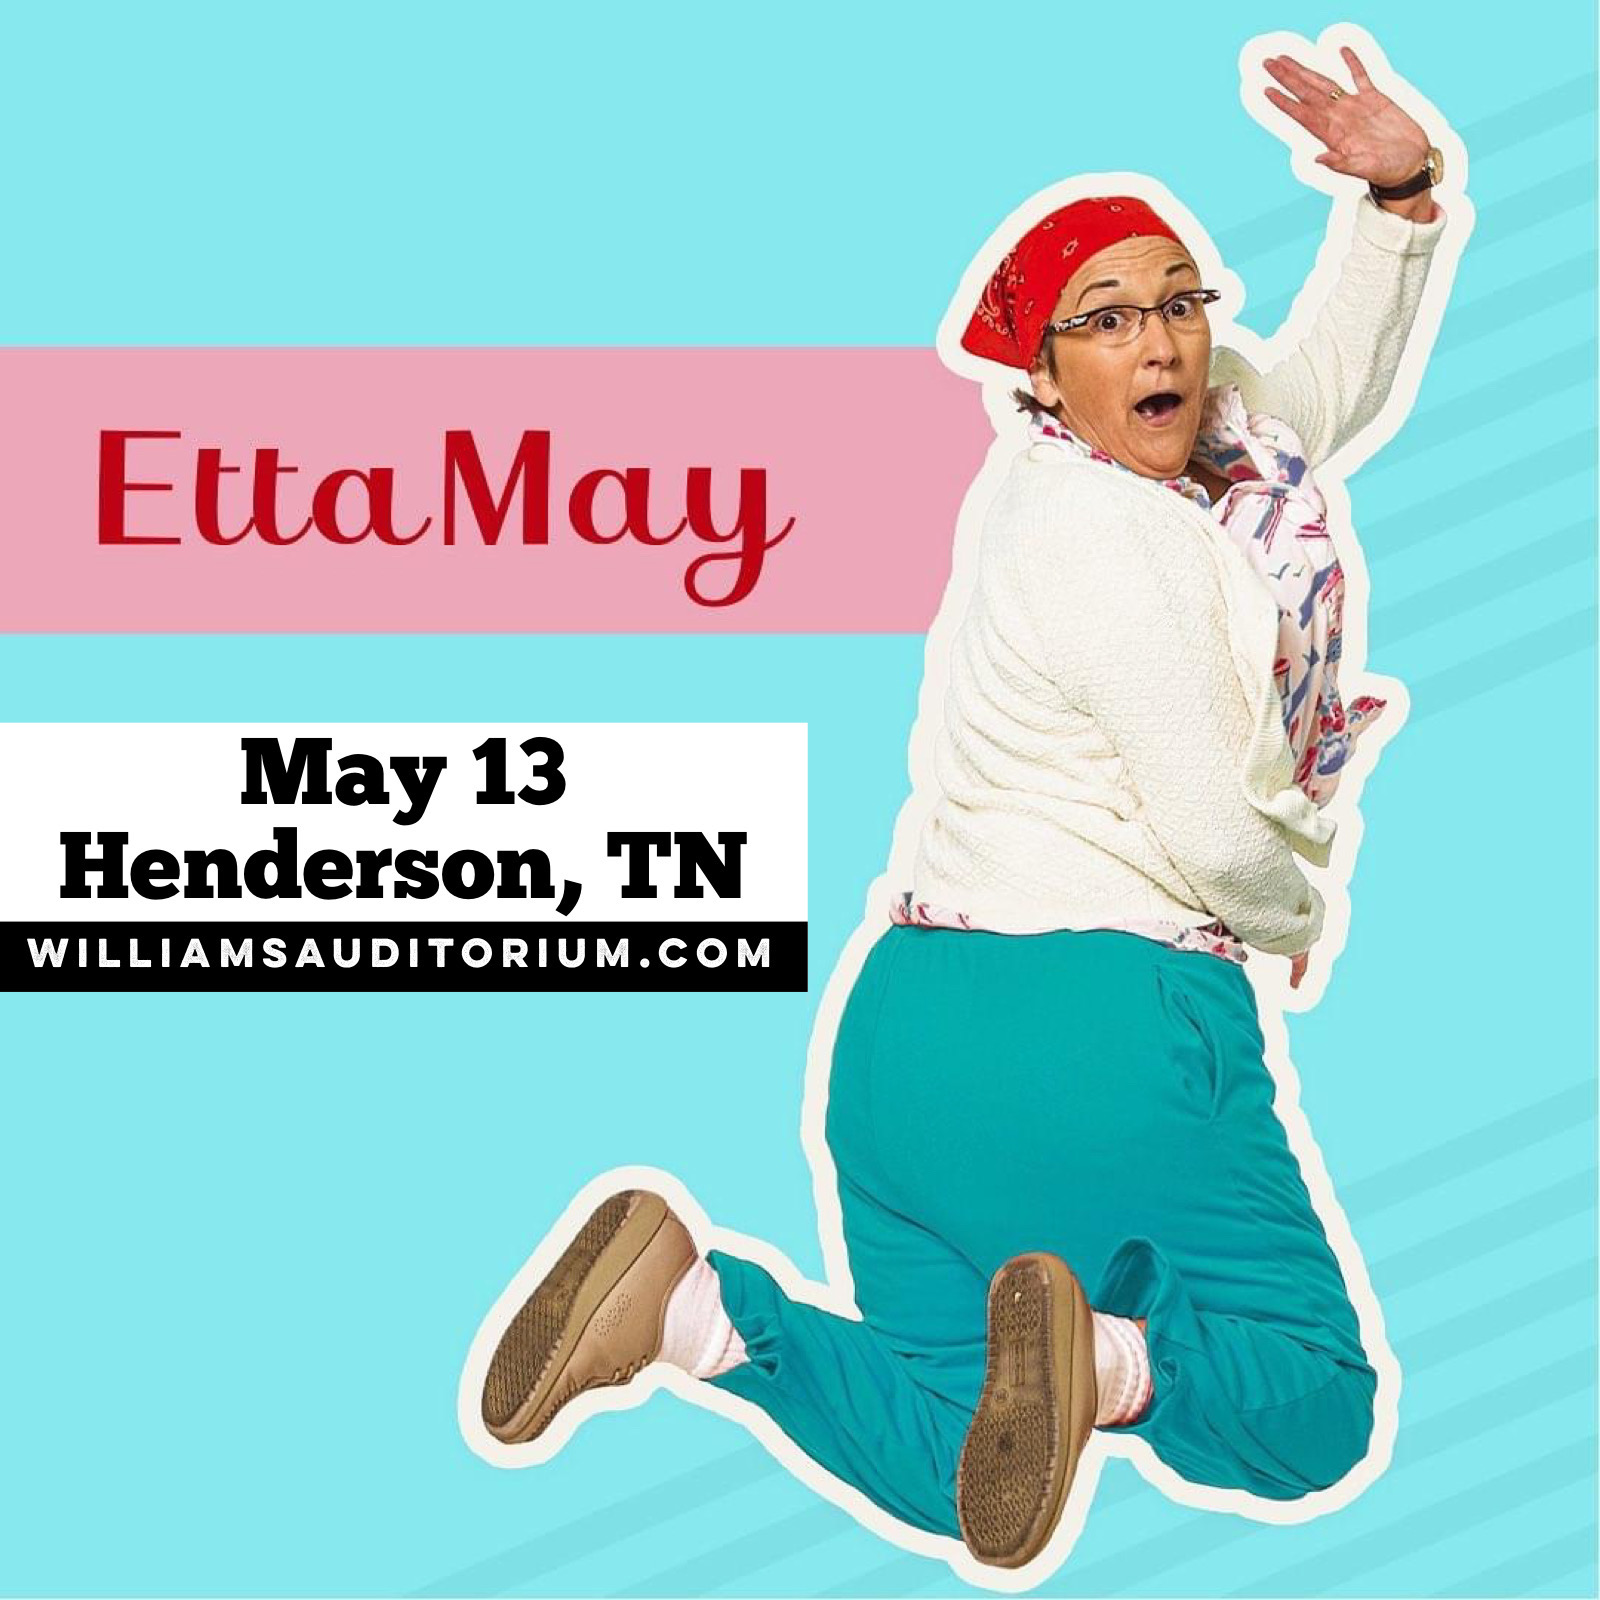 Buy Tickets to Etta May in Henderson on May 13, 2023